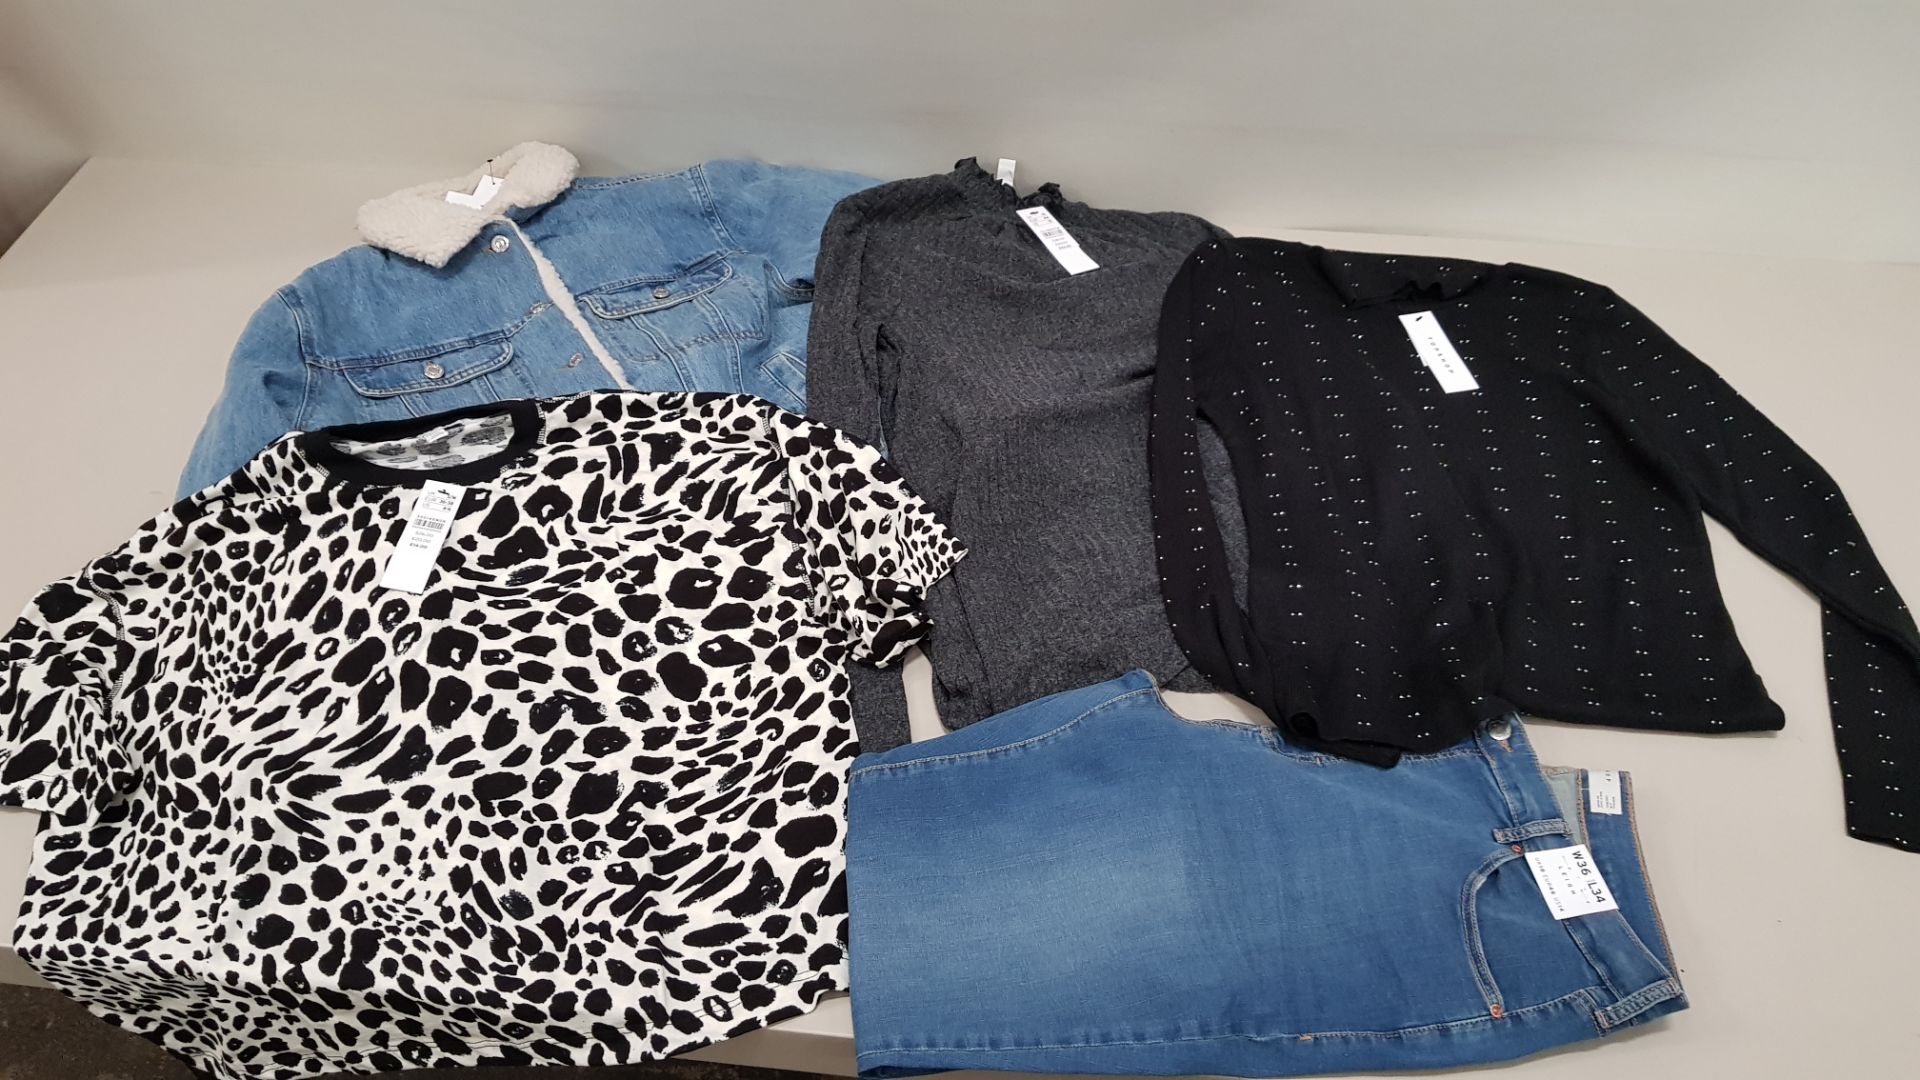 19 PIECE MIXED TOPSHOP LOT CONTAINING PATTERNED TOPS, LEIGH JEANS, DENIM JACKETS AND DRESSES ETC